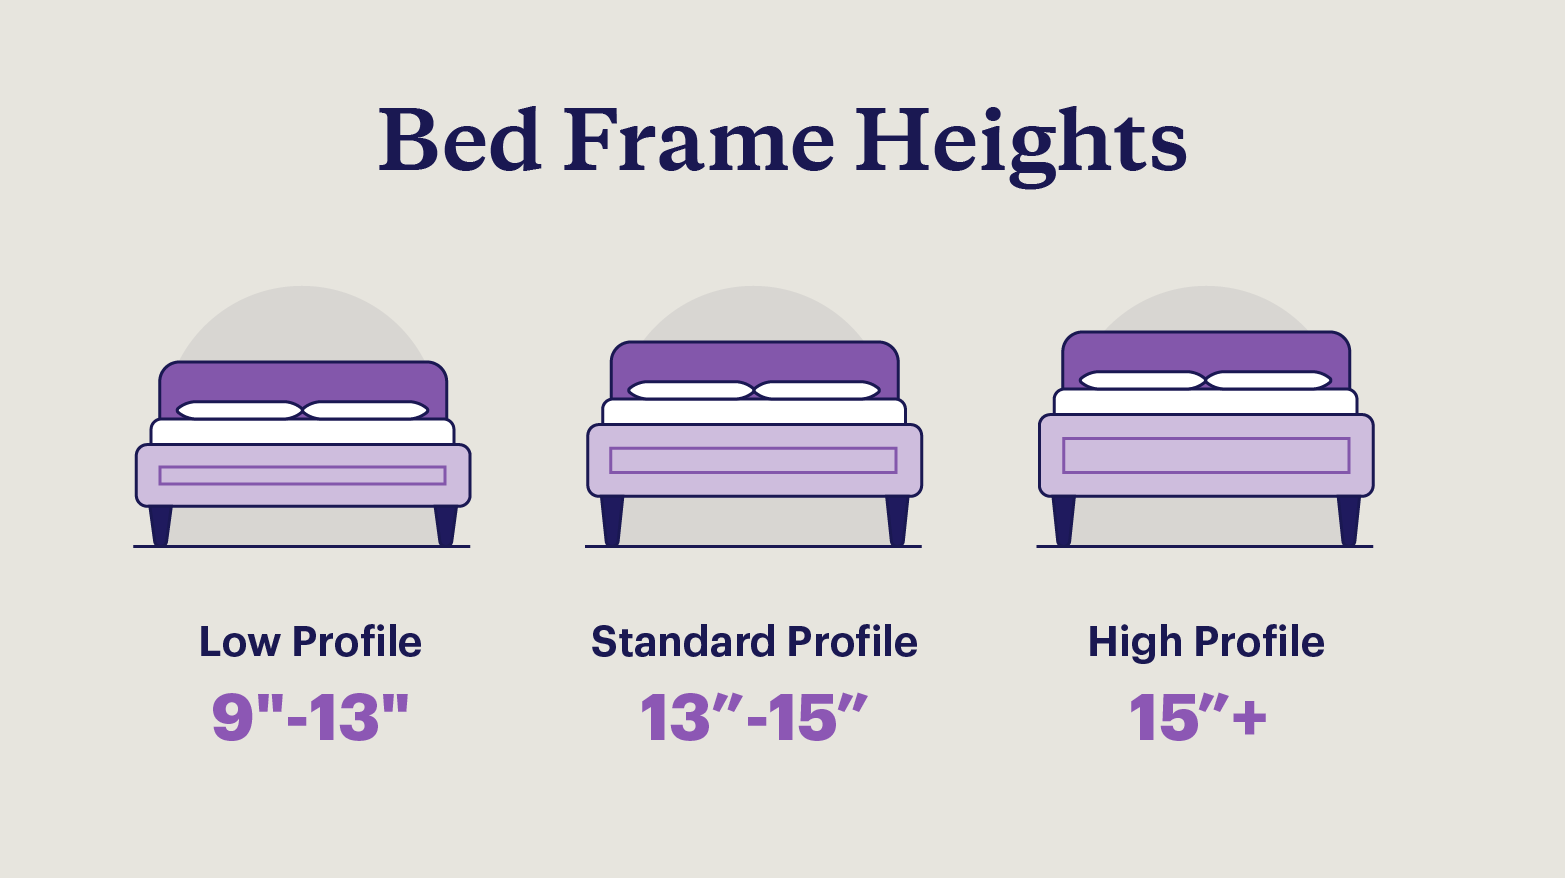 Three bed illustrations show the three common bed frame height ranges including low profile, standard profile, and high profile.